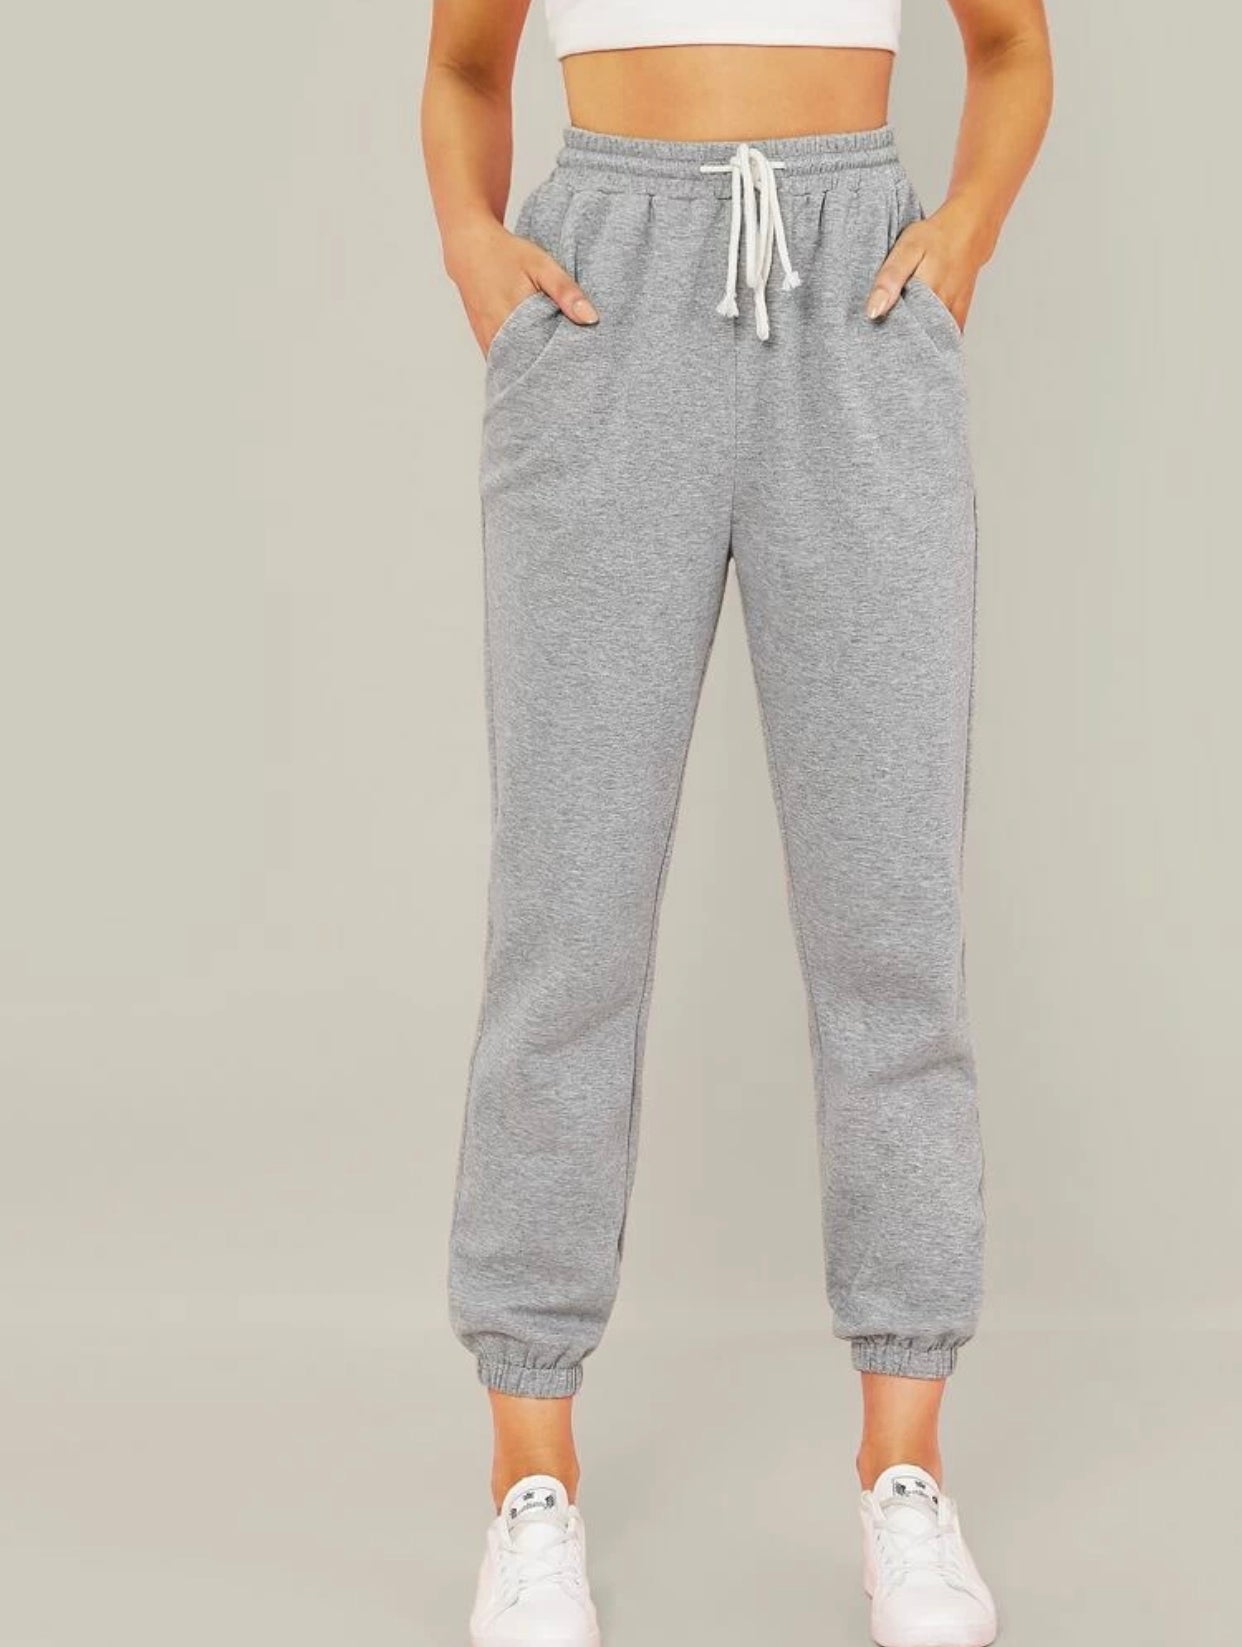 Teen Solid Grey Cotton Sweatpant